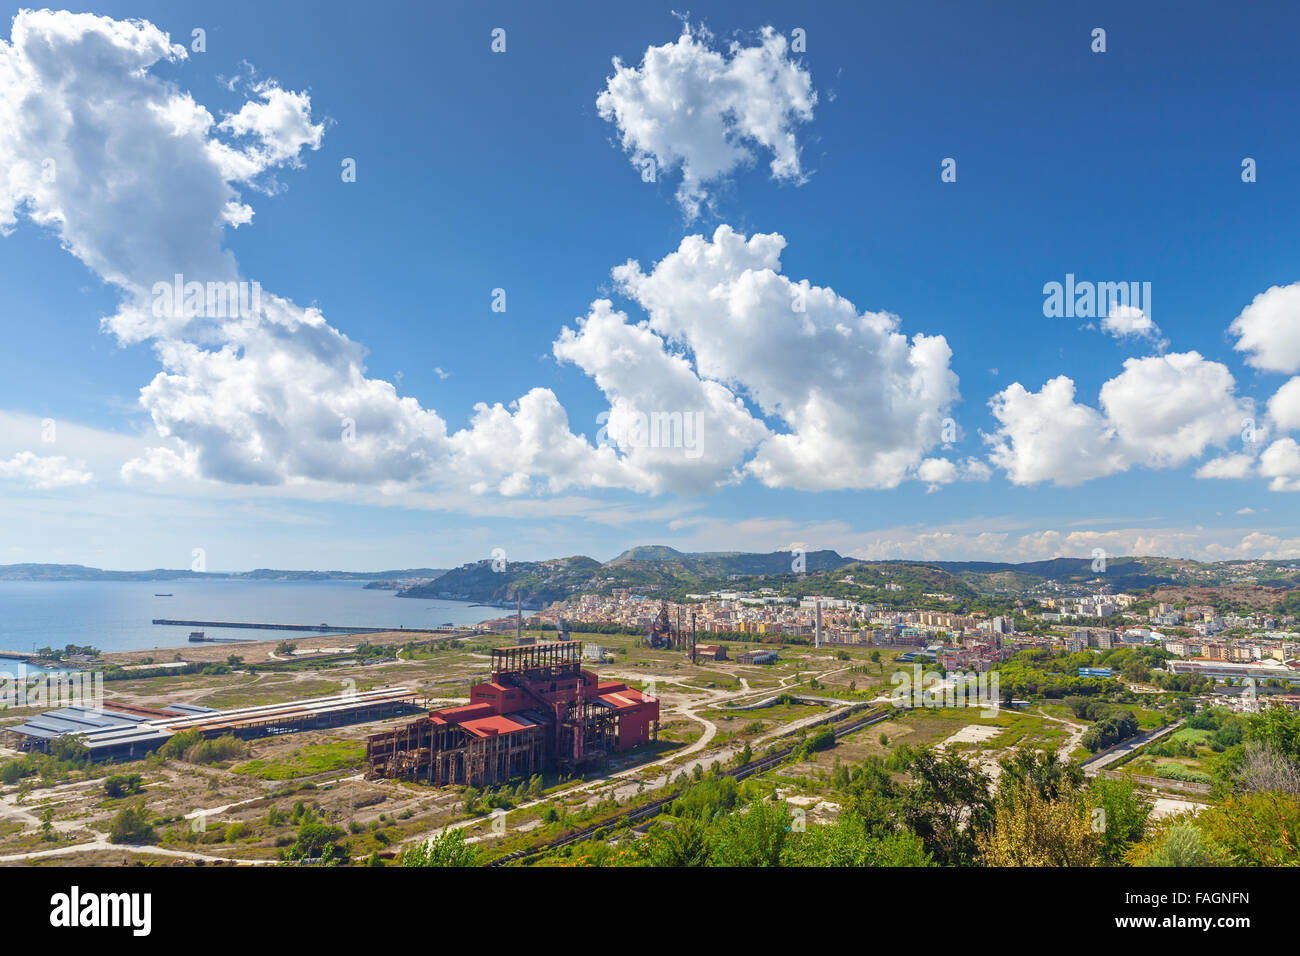 Abandoned iron and steel works factory on the outskirts of Naples. Bagnoli, ex industrial area Stock Photo